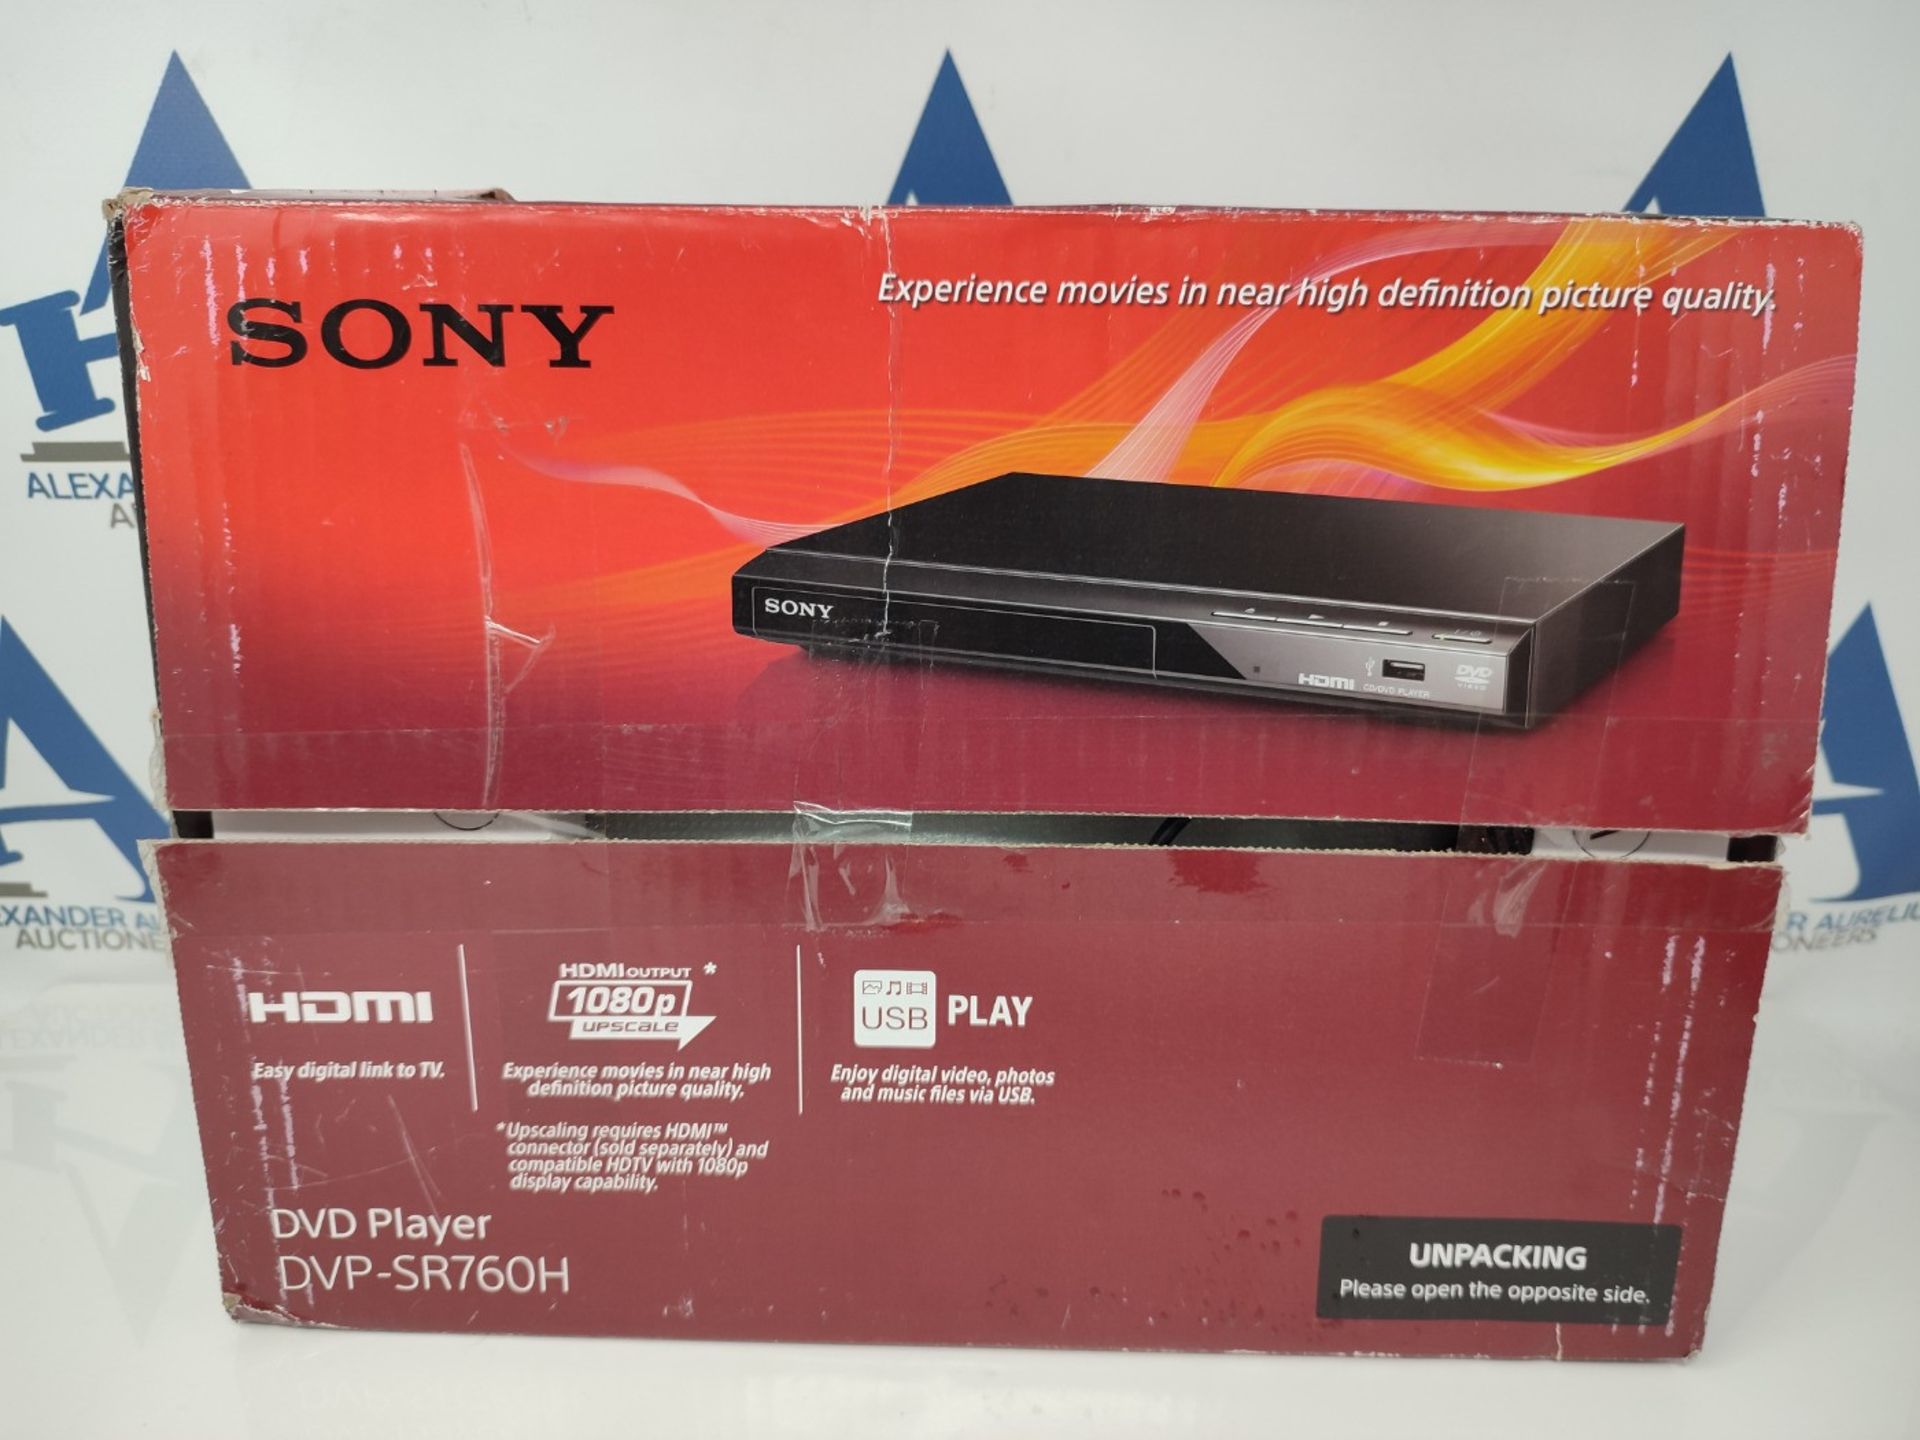 Sony DVPSR760H DVD Upgrade Player (HDMI, 1080 Pixel Upscaling, USB Connectivity), Blac - Image 2 of 3